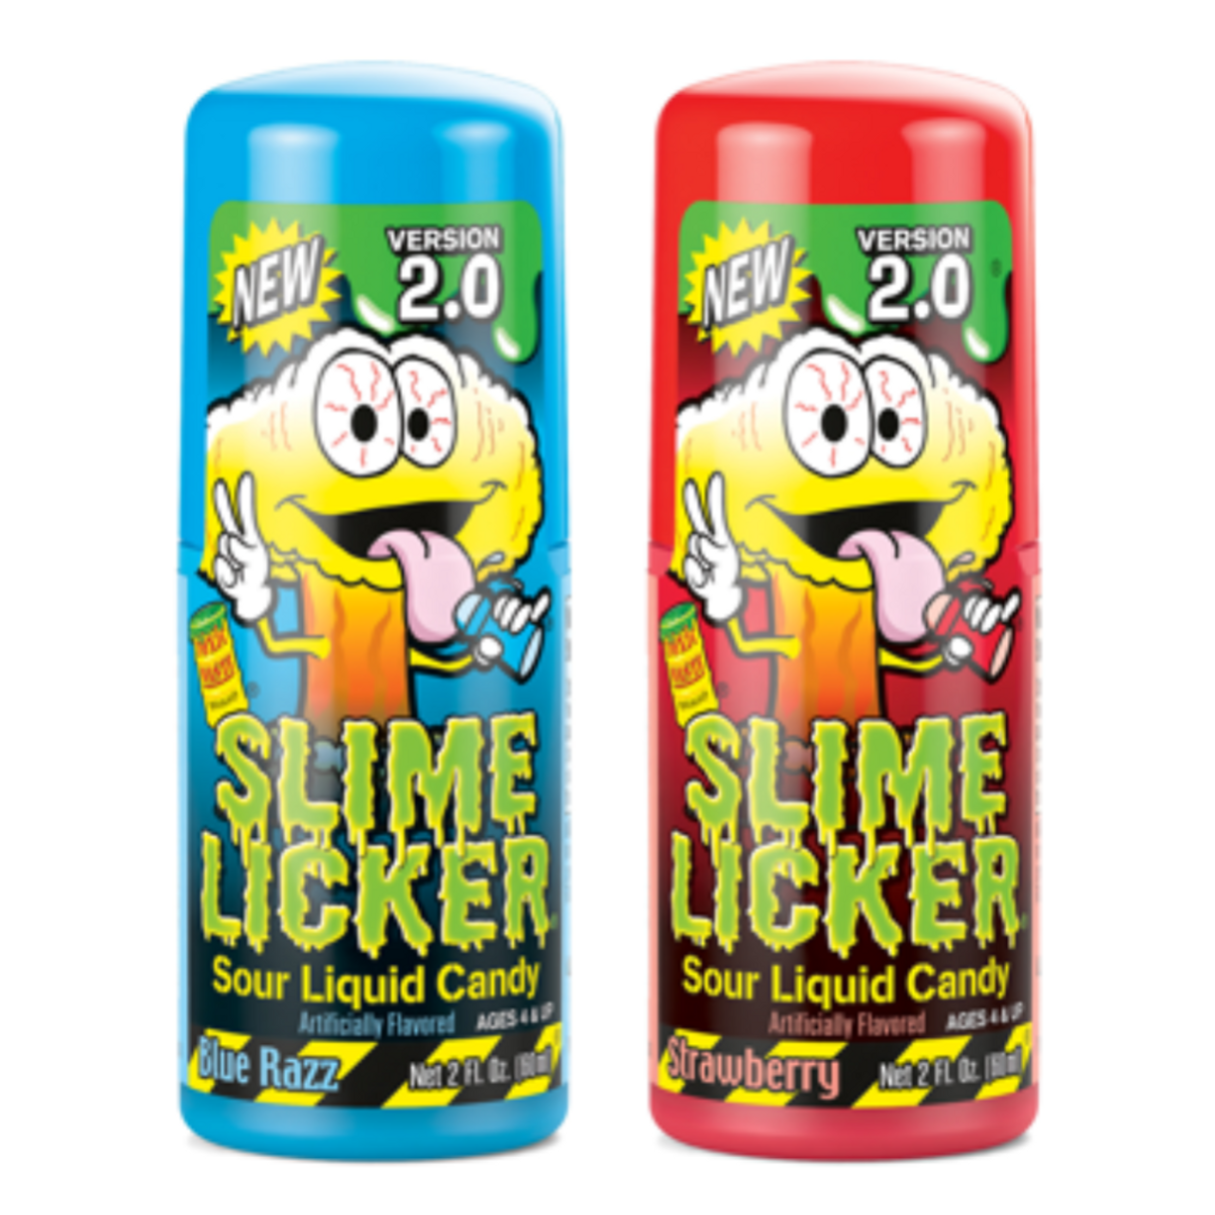 Toxic Waste Slime Licker 2.0 Version Sour Liquid Candy 2oz - 12ct